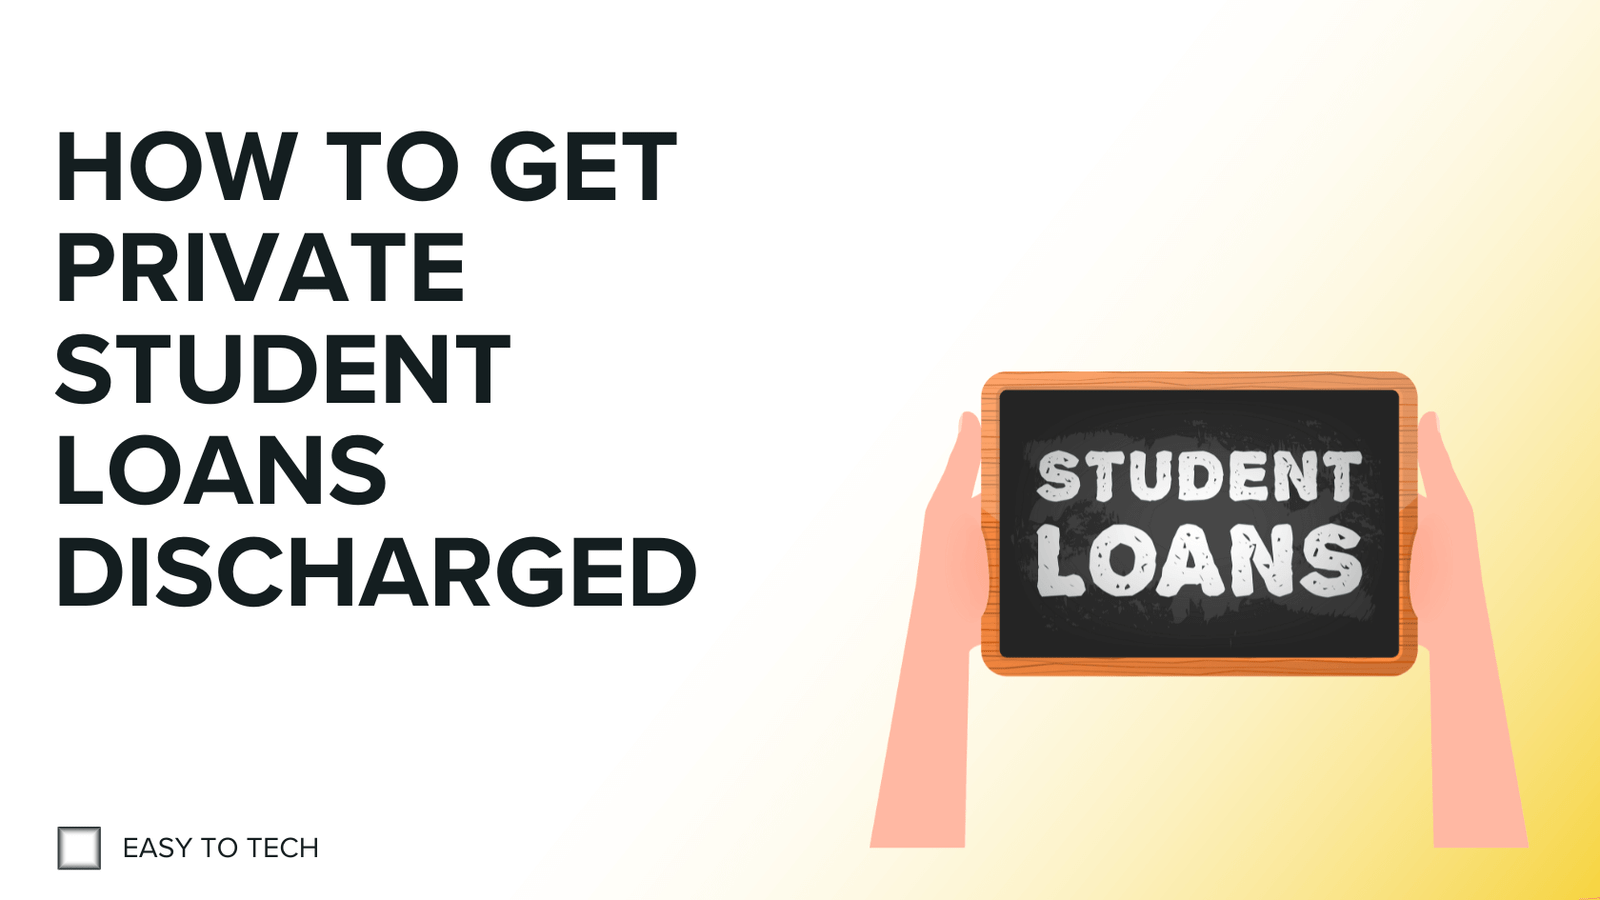 HOW TO GET PRIVATE STUDENT LOANS DISCHARGED